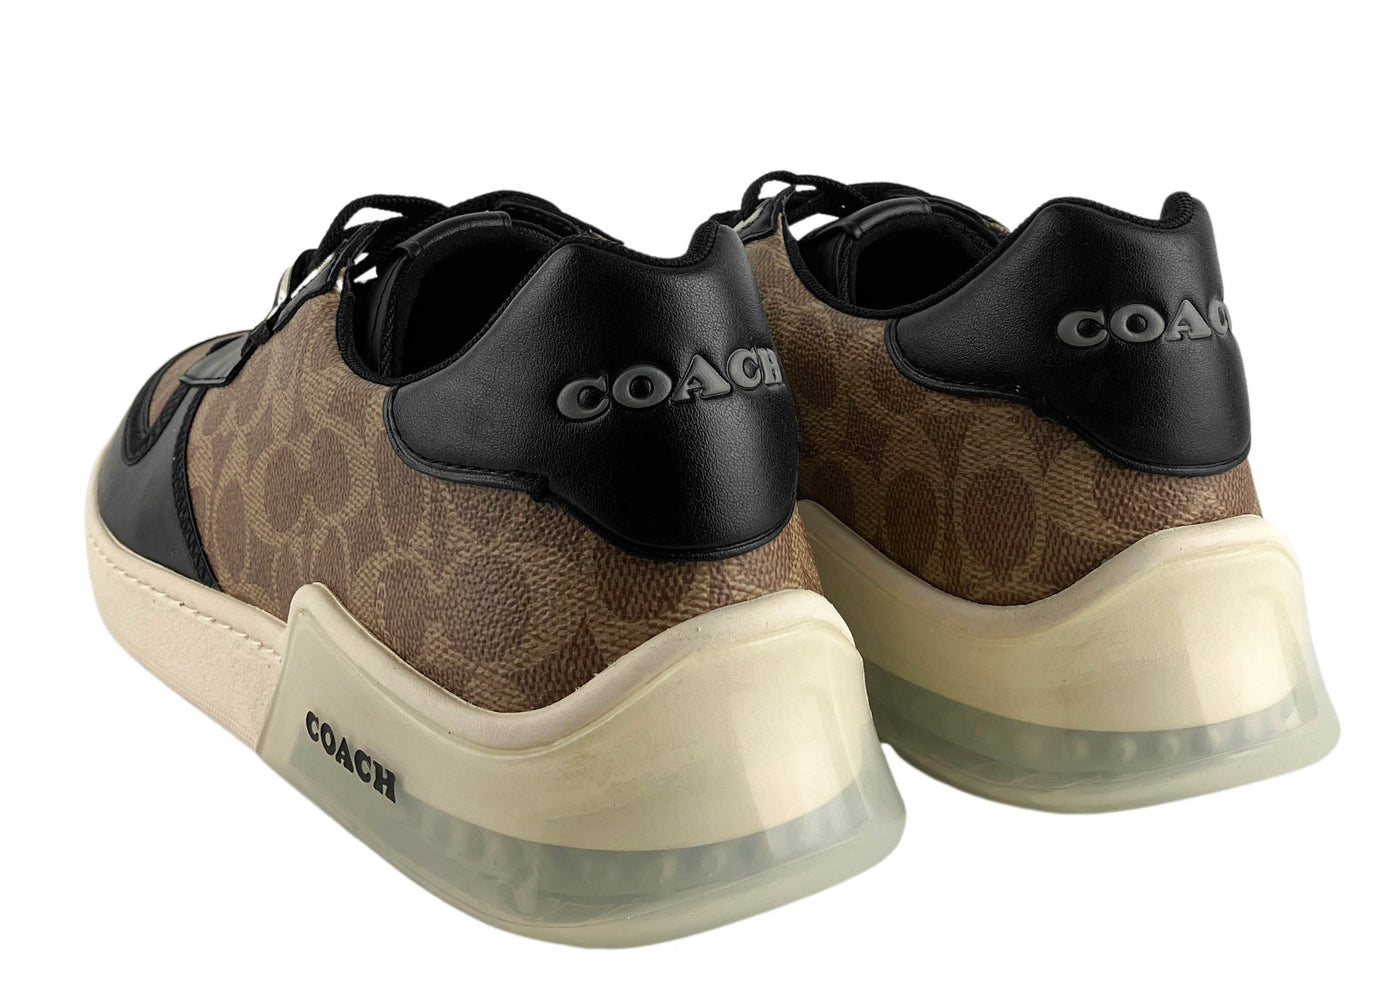 Coach City Sole Signature Court Sneakers in Tan and Black - Discounts on Coach at UAL